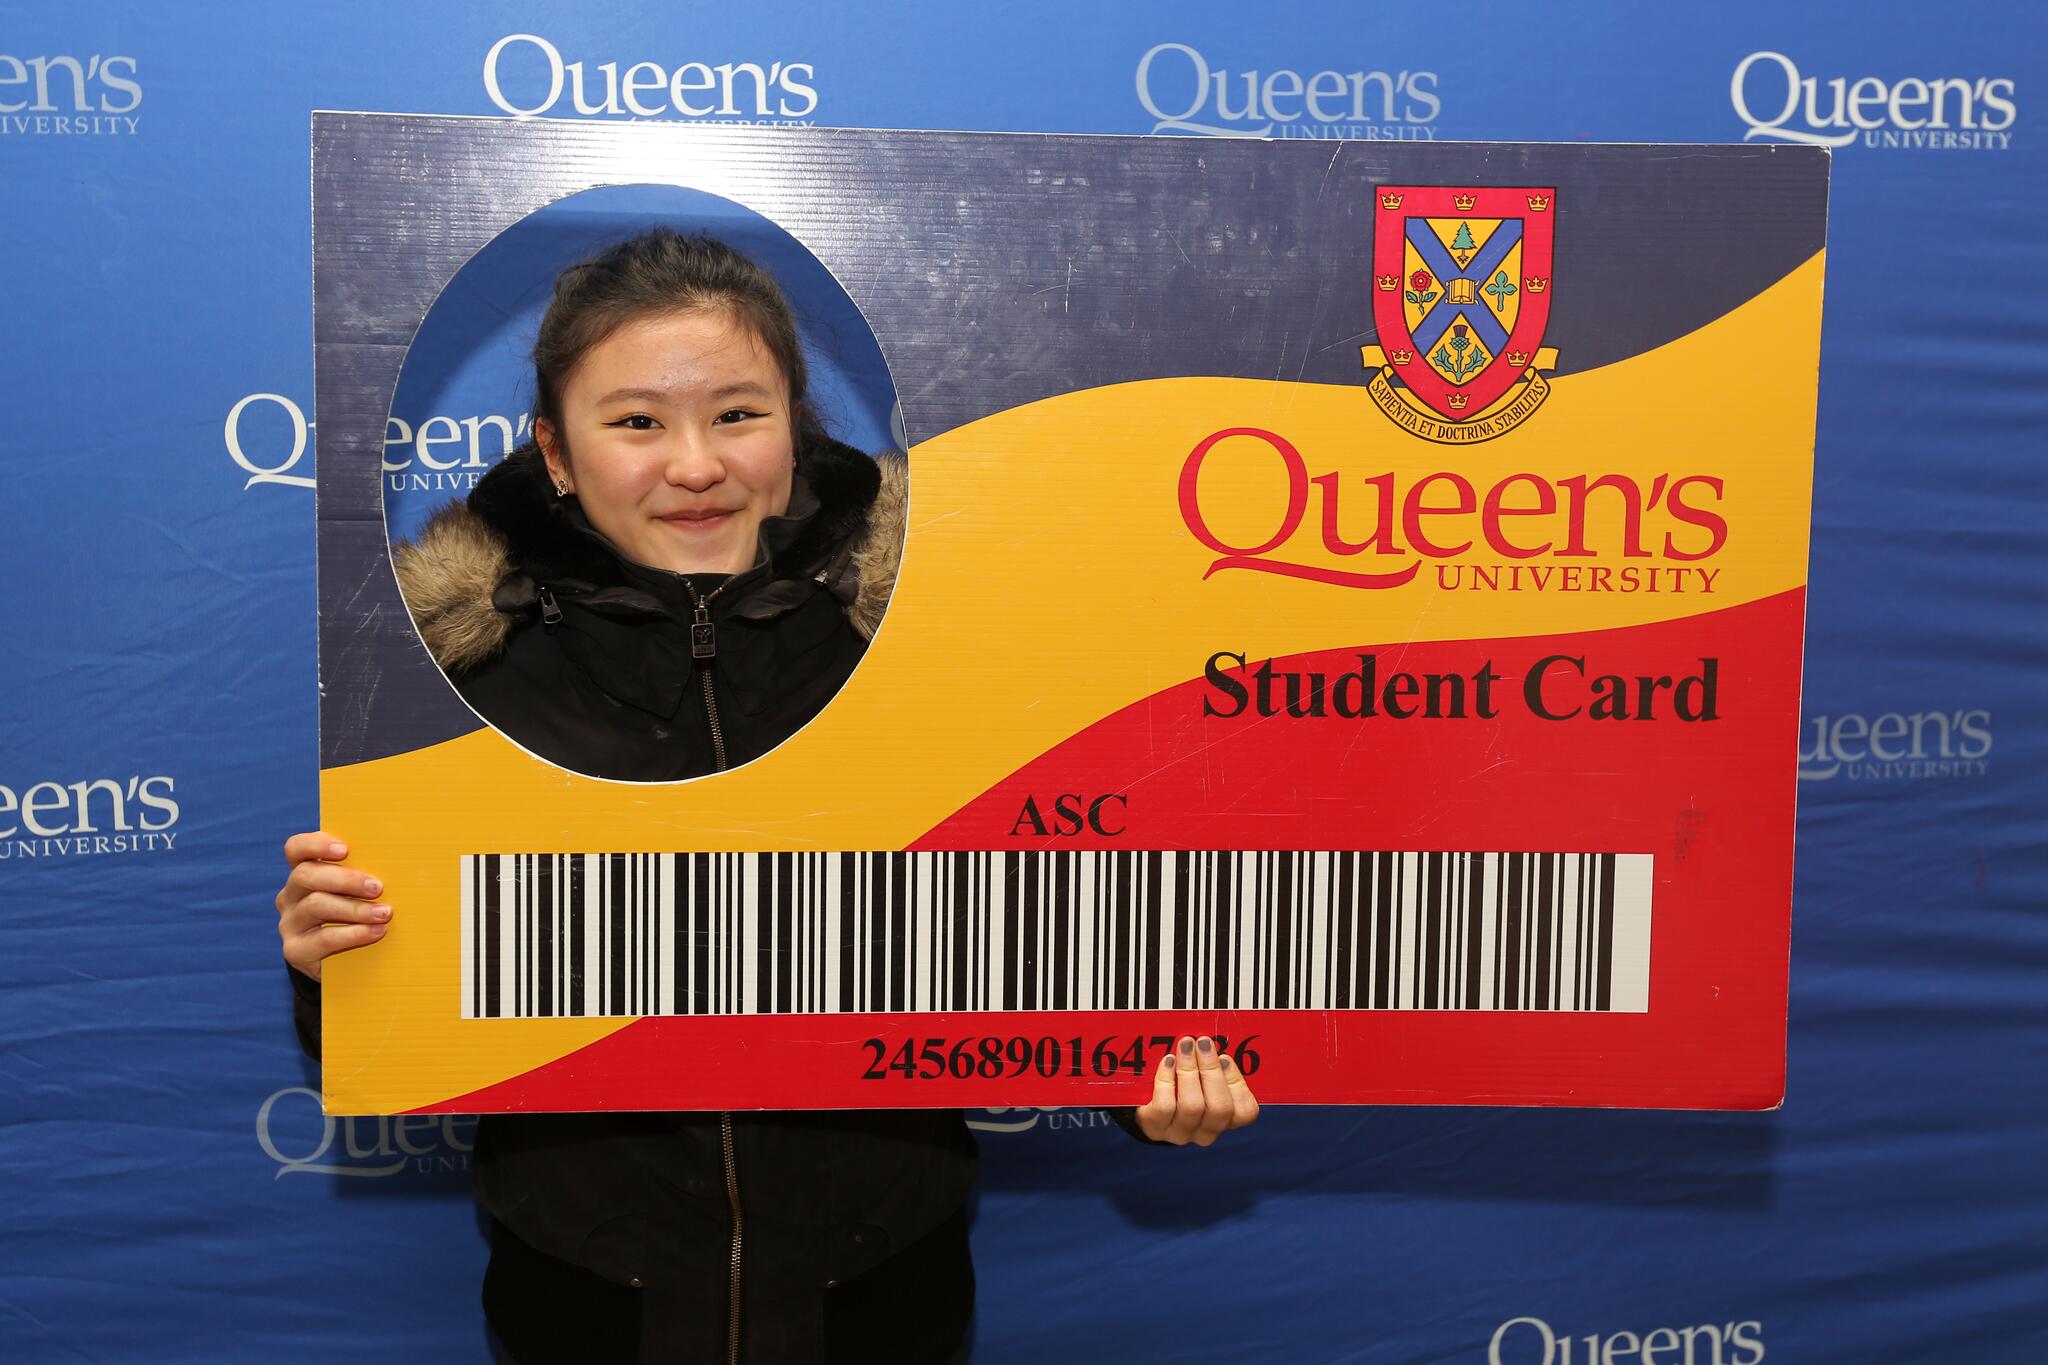 Student with Life-Sized Student Card